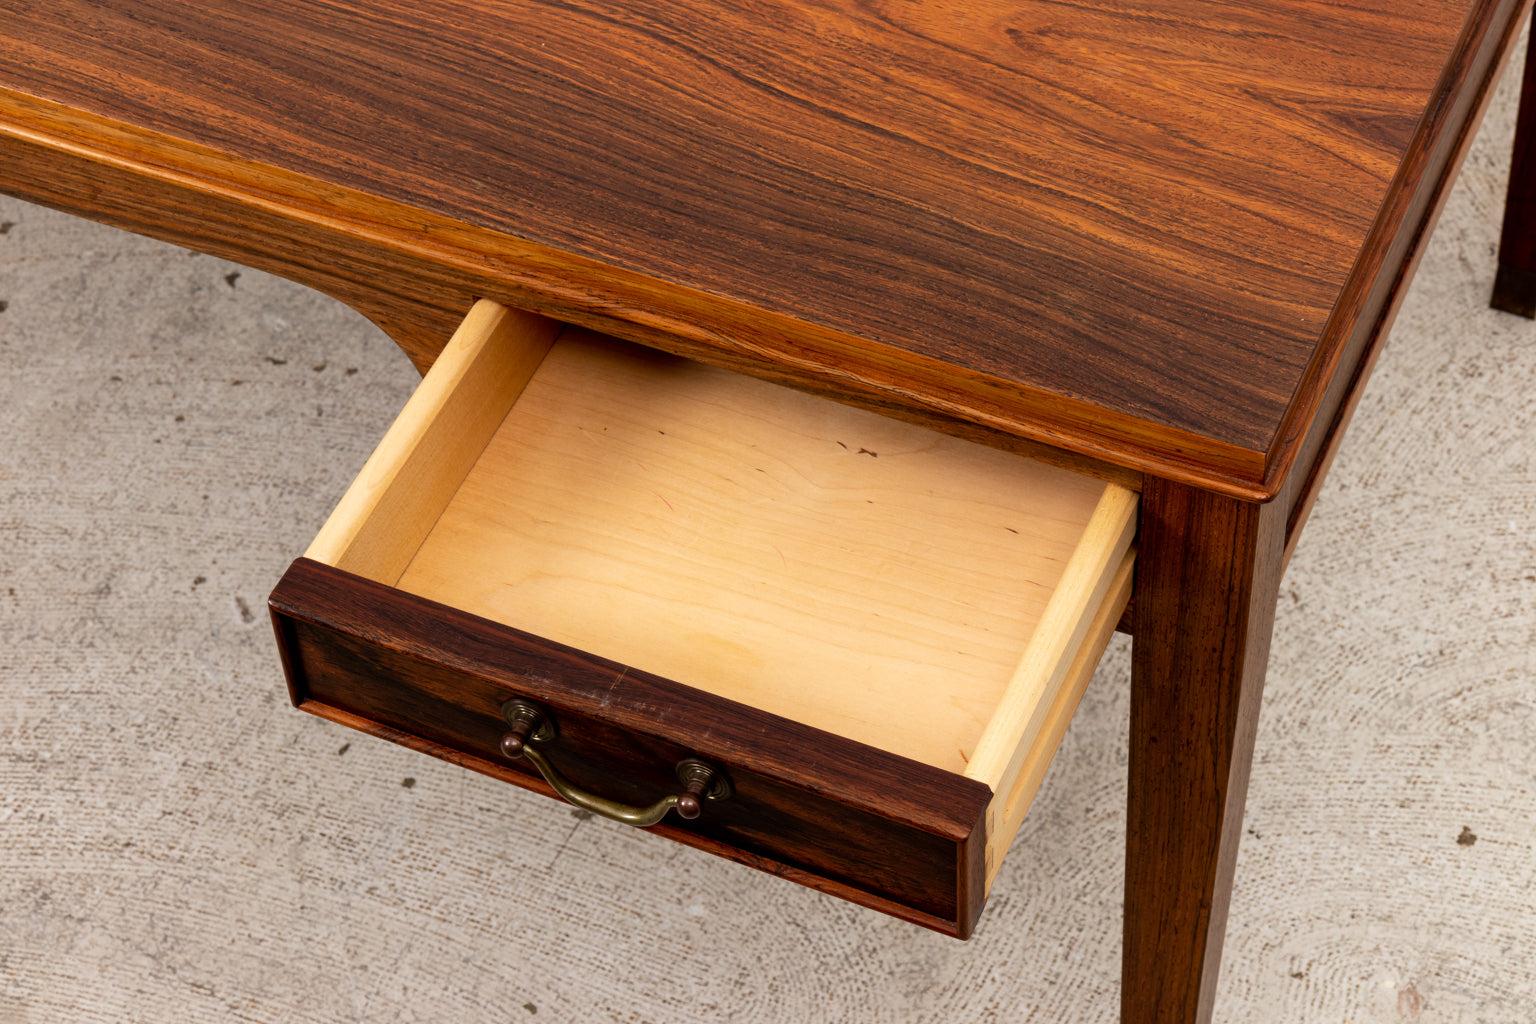 Rosewood coffee table featuring four small drawers (2 on each side), with brass capped feet and bail handles. Made in 1970s in Denmark. Please note wear consistent with age.
 